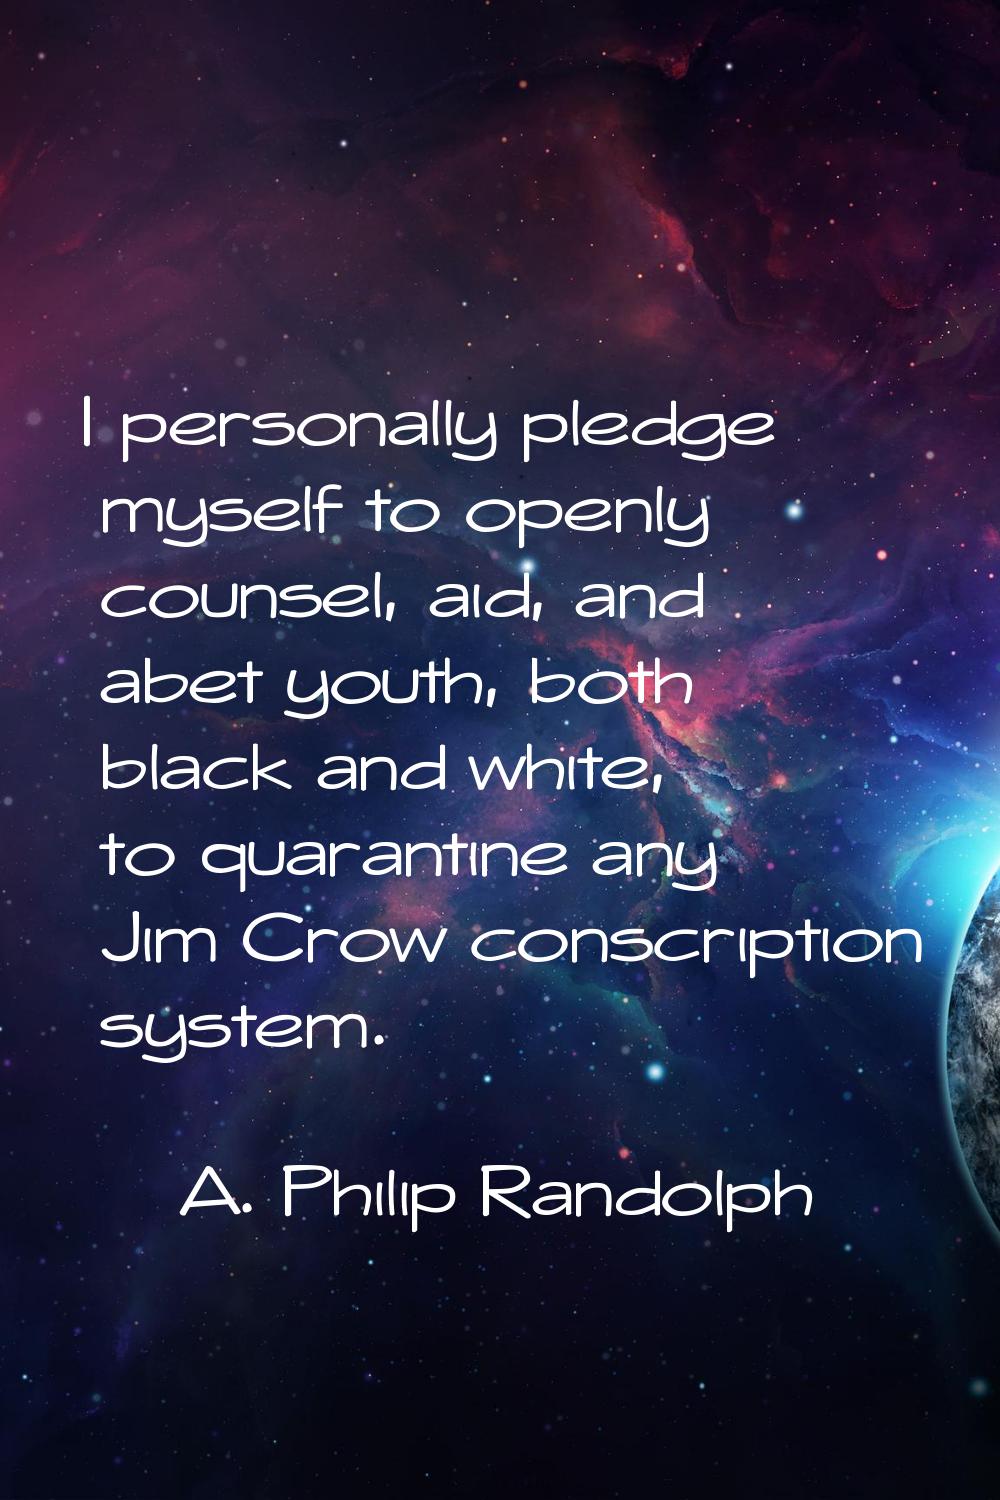 I personally pledge myself to openly counsel, aid, and abet youth, both black and white, to quarant